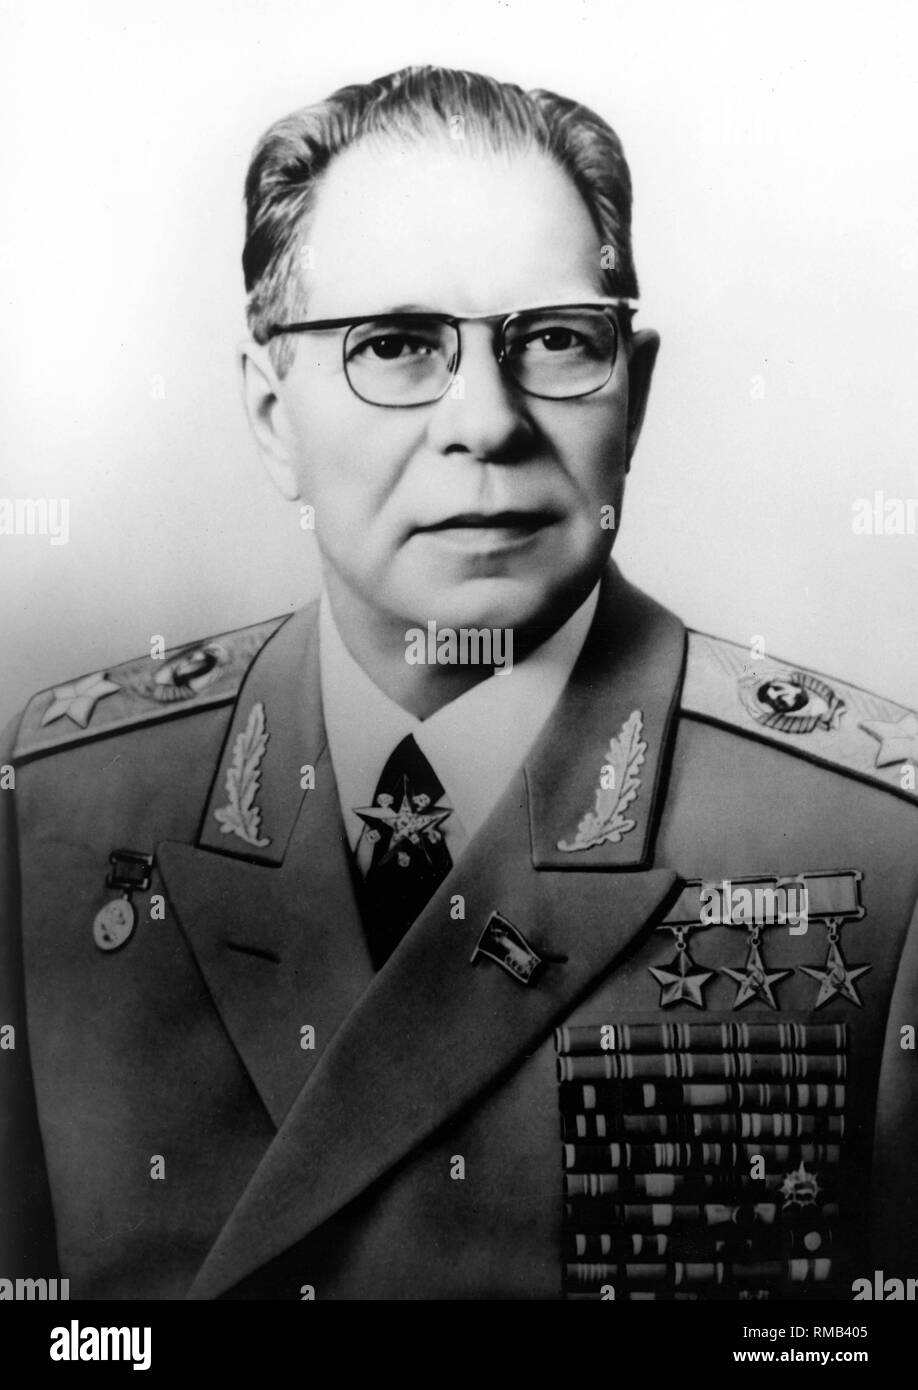 Dimitri Fedorowitsch Ustinow (* 17.10.1908-20.12.1984), a member of the Politburo of the CPSU and Marshal, between 1976 - 1984 Minister of Defense of the USSR. The war in Afghanistan also took place during his tenure as defense minister. Undated photo from 1982. Stock Photo